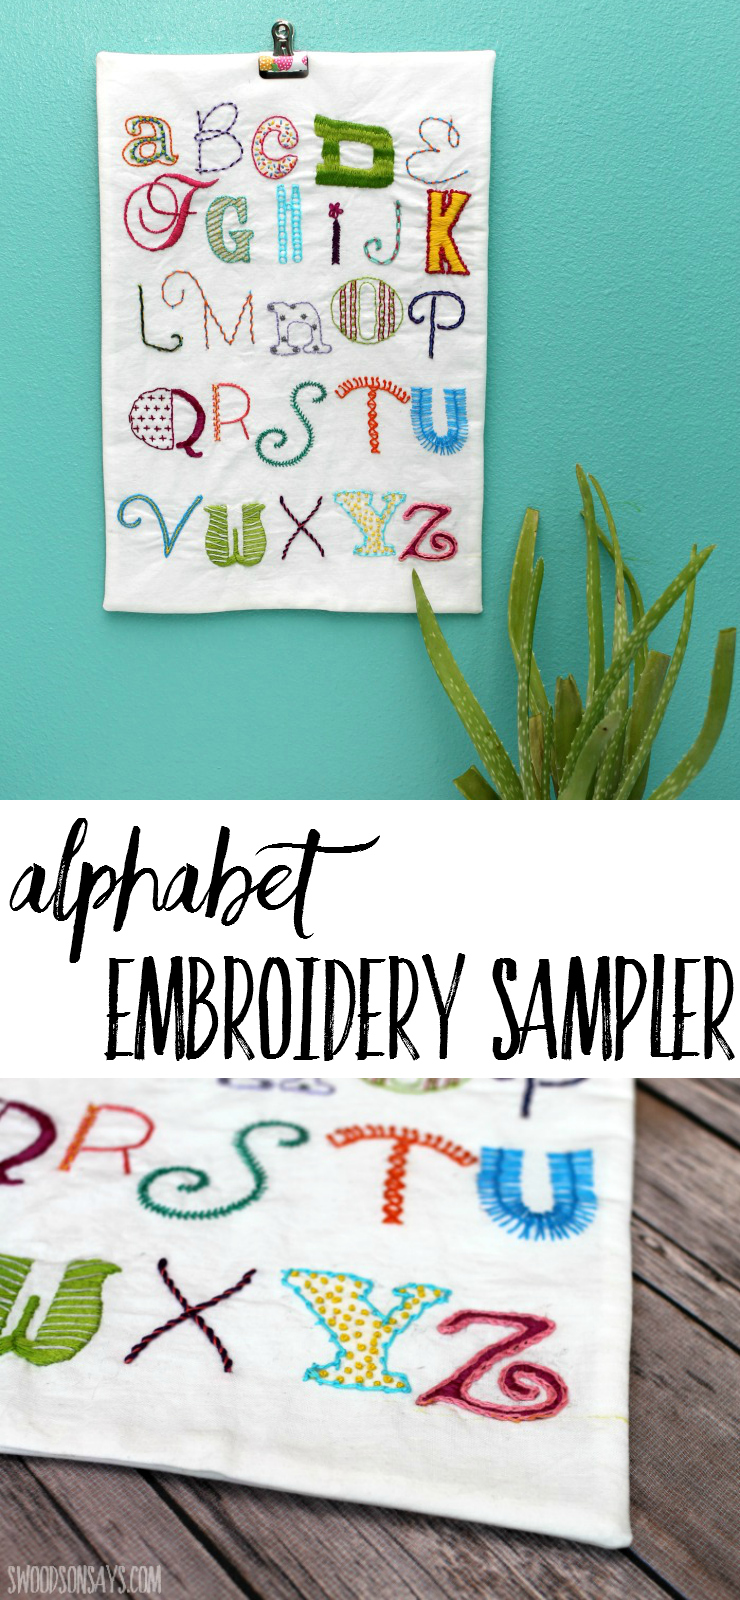 Check out this alphabet ABC embroidery sampler! Learn different stitches while making a beautiful embroidery piece for a nursery or play room.